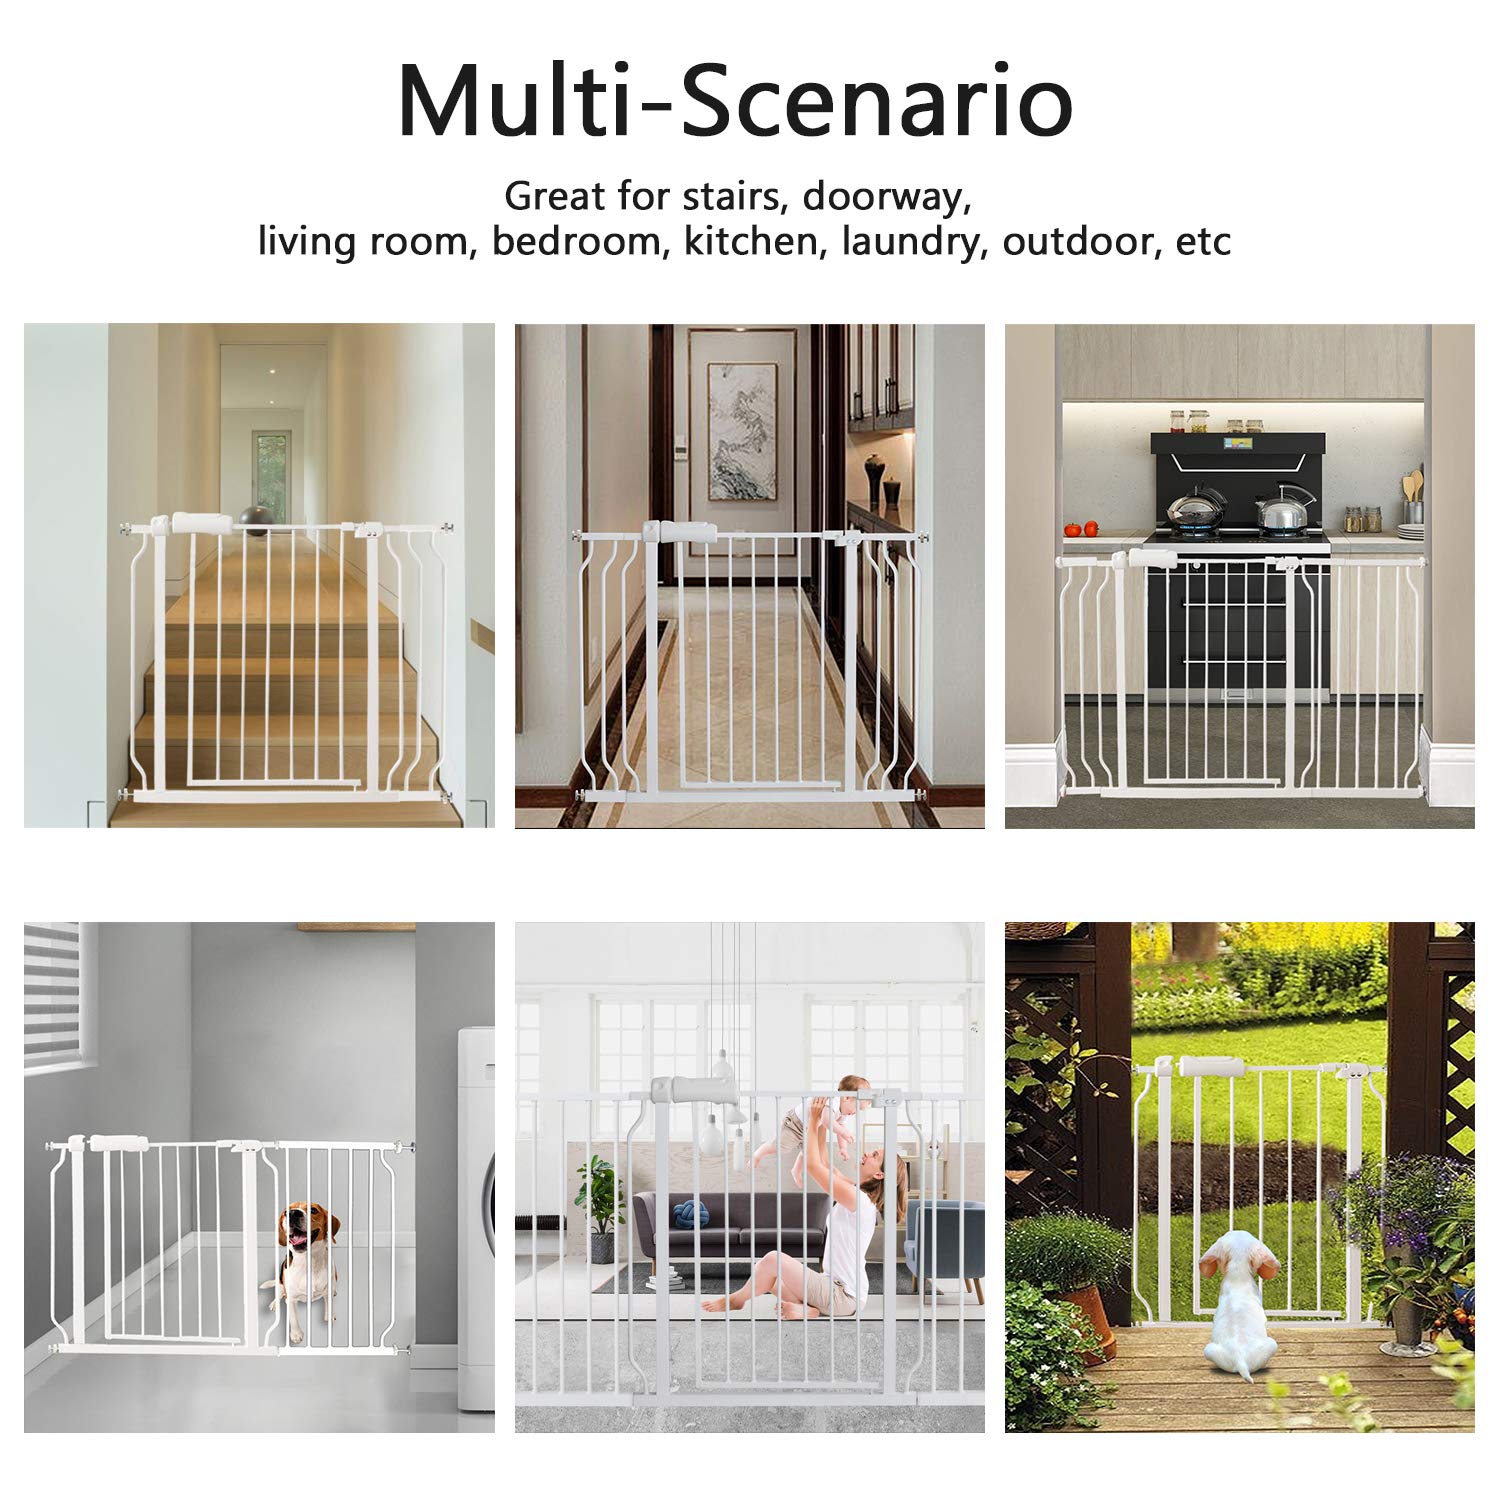 Fairy Baby Extra Wide Baby Gates 67-71.5 Inch, Auto Close Child Safety Gates for Stairs Banister Doorways Hallway,Indoor Safety Child Gates for Kids or Pets